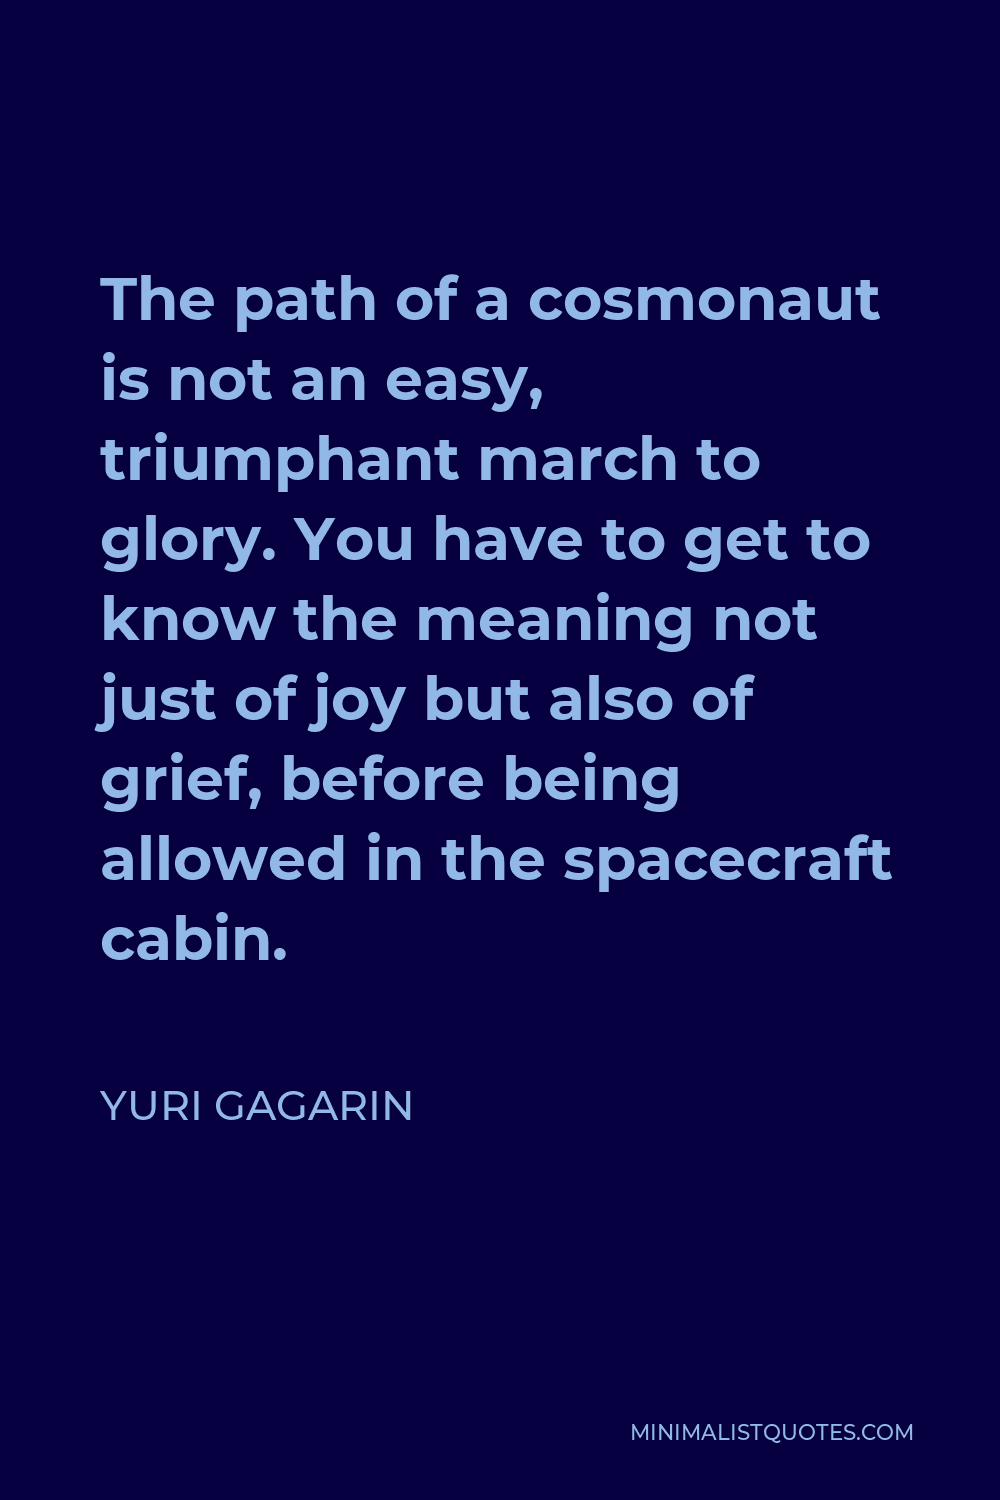 Yuri Gagarin Quote - The path of a cosmonaut is not an easy, triumphant march to glory. You have to get to know the meaning not just of joy but also of grief, before being allowed in the spacecraft cabin.